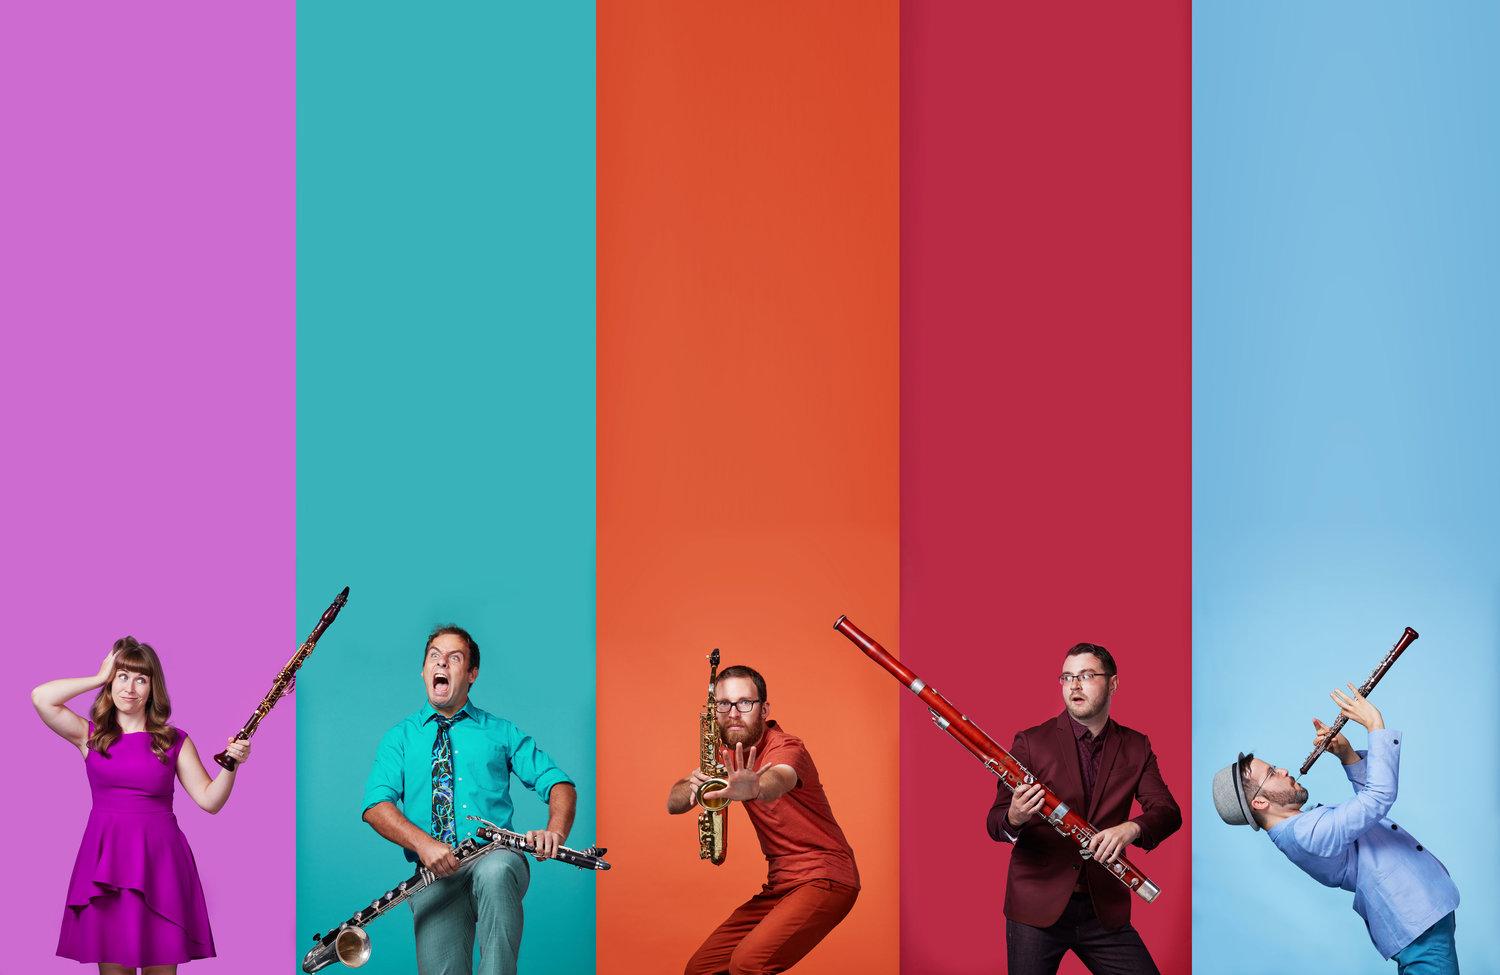 Perfrormers of Akropolis Quintet pose with their instruments in front of a background of color blocks